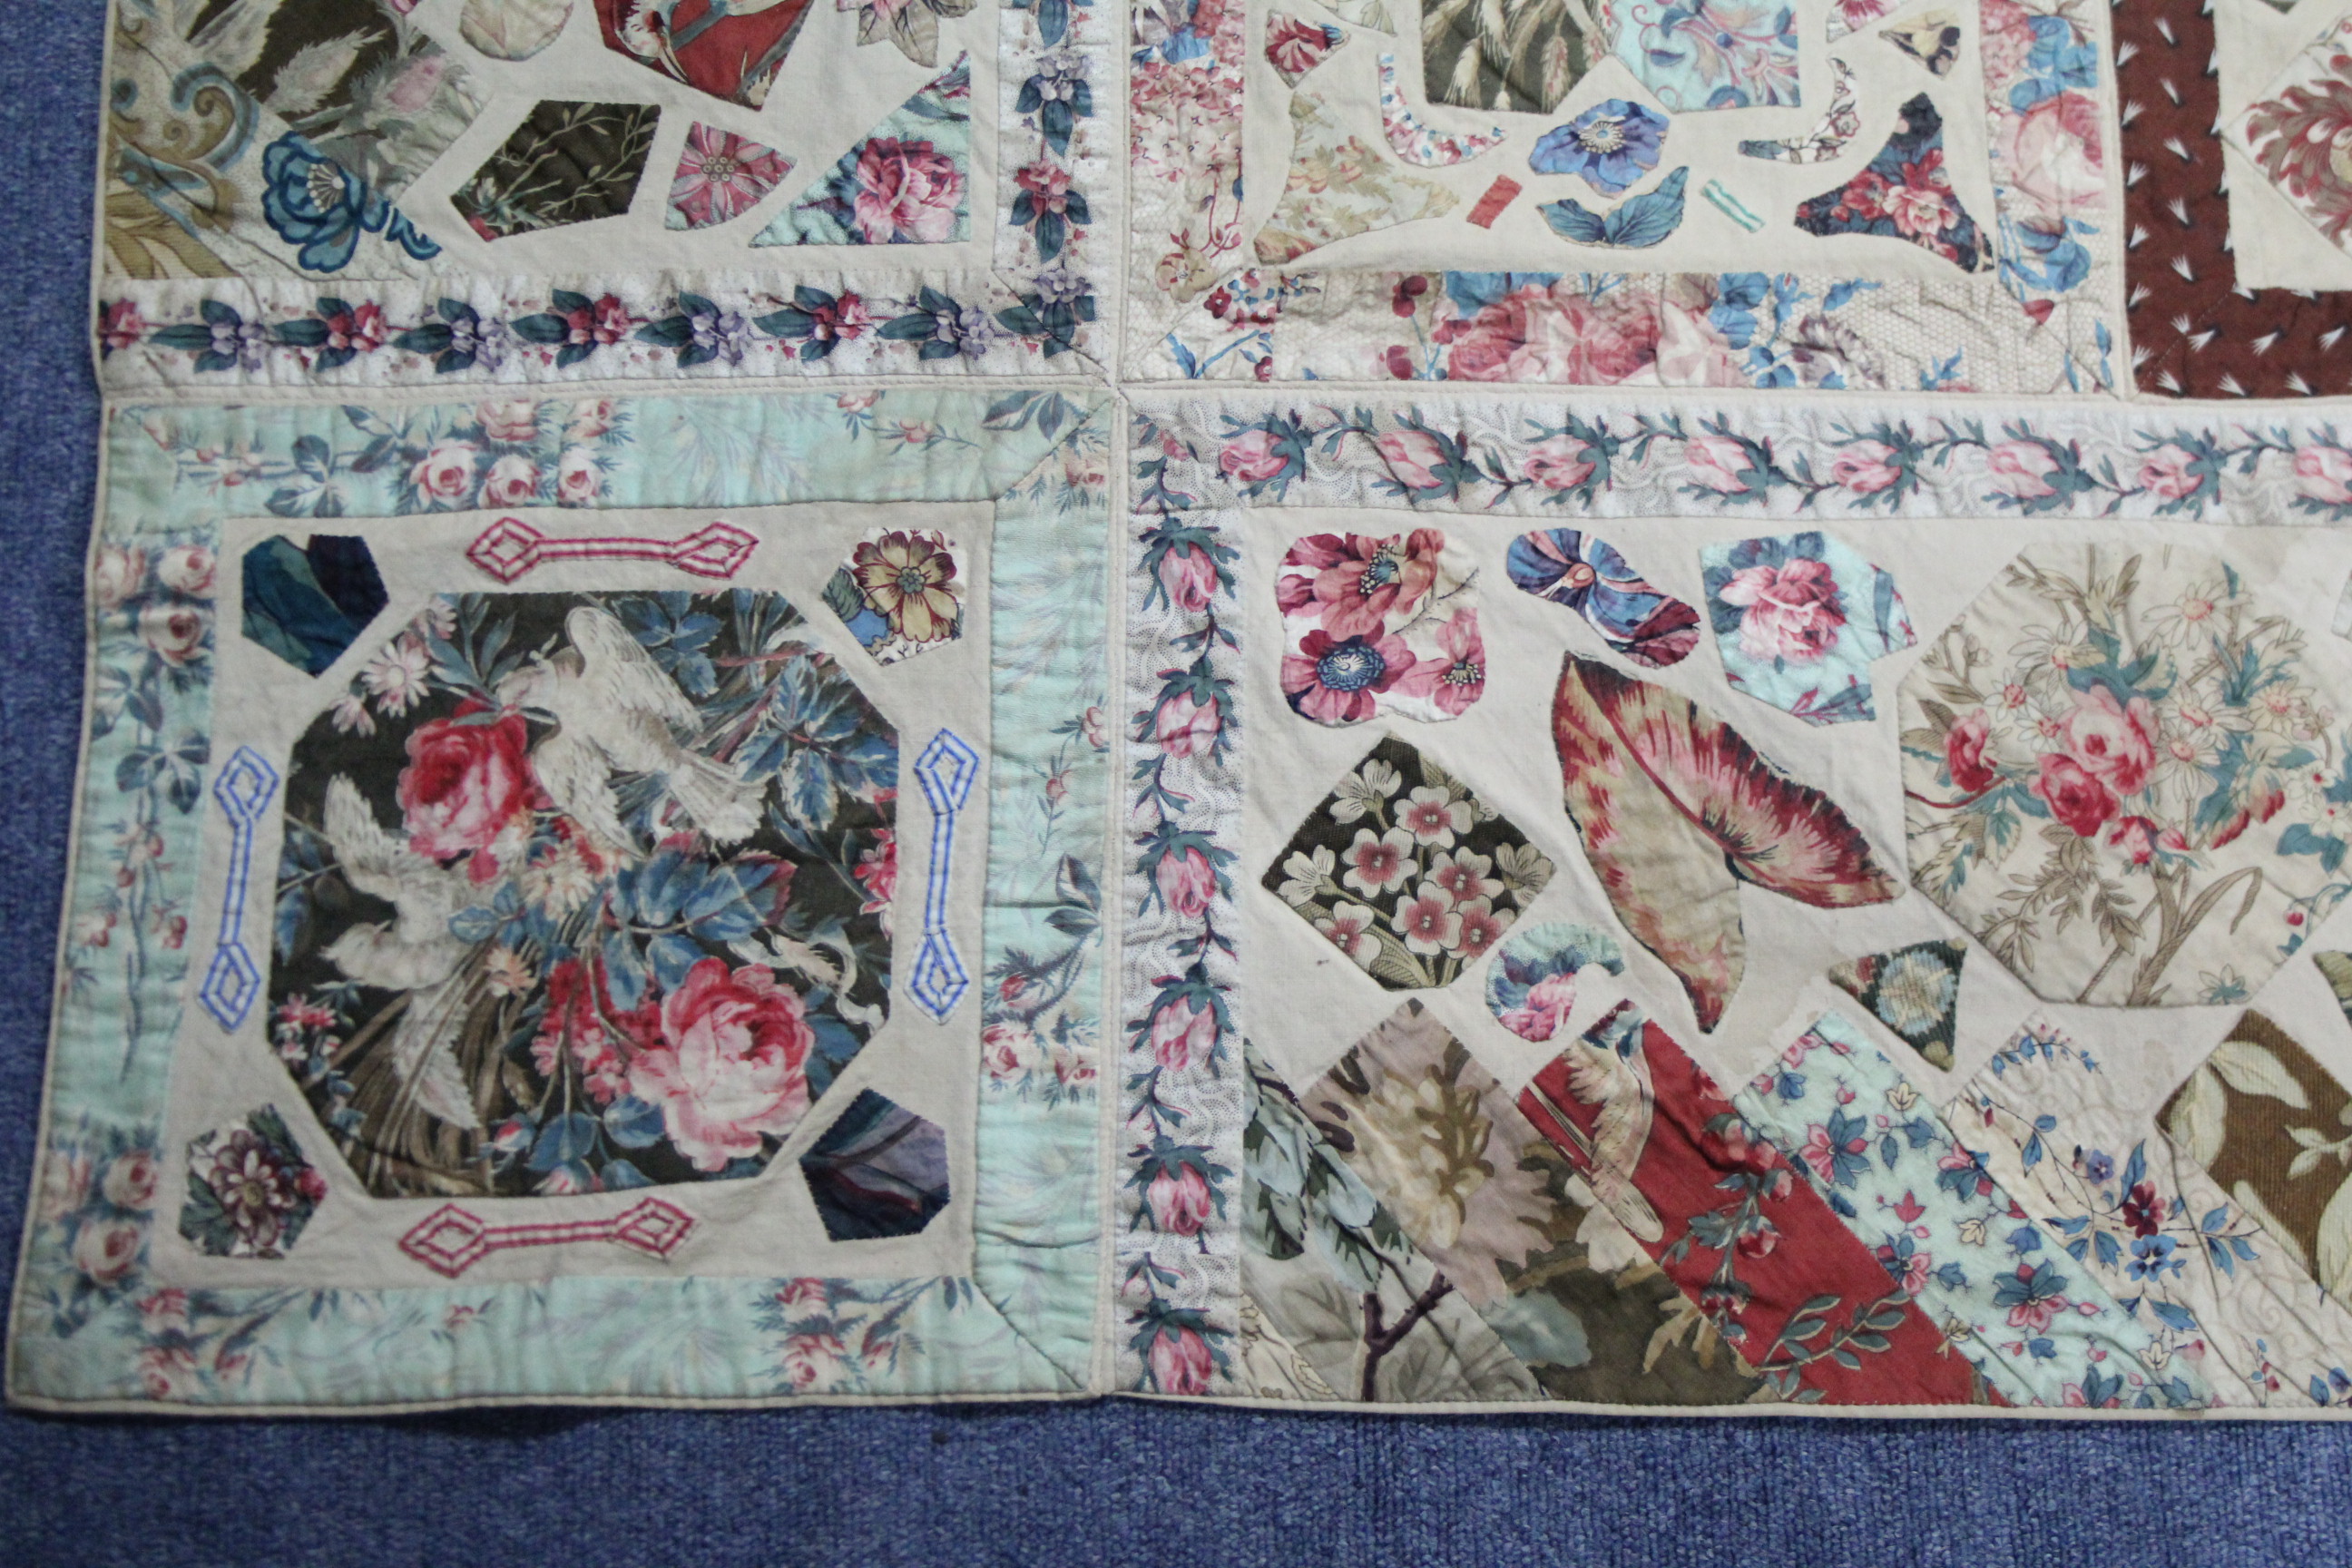 A VICTORIAN PATCHWORK BEDSPREAD or WALL HANGING comprising a wide variety of printed fabrics cut - Image 3 of 5